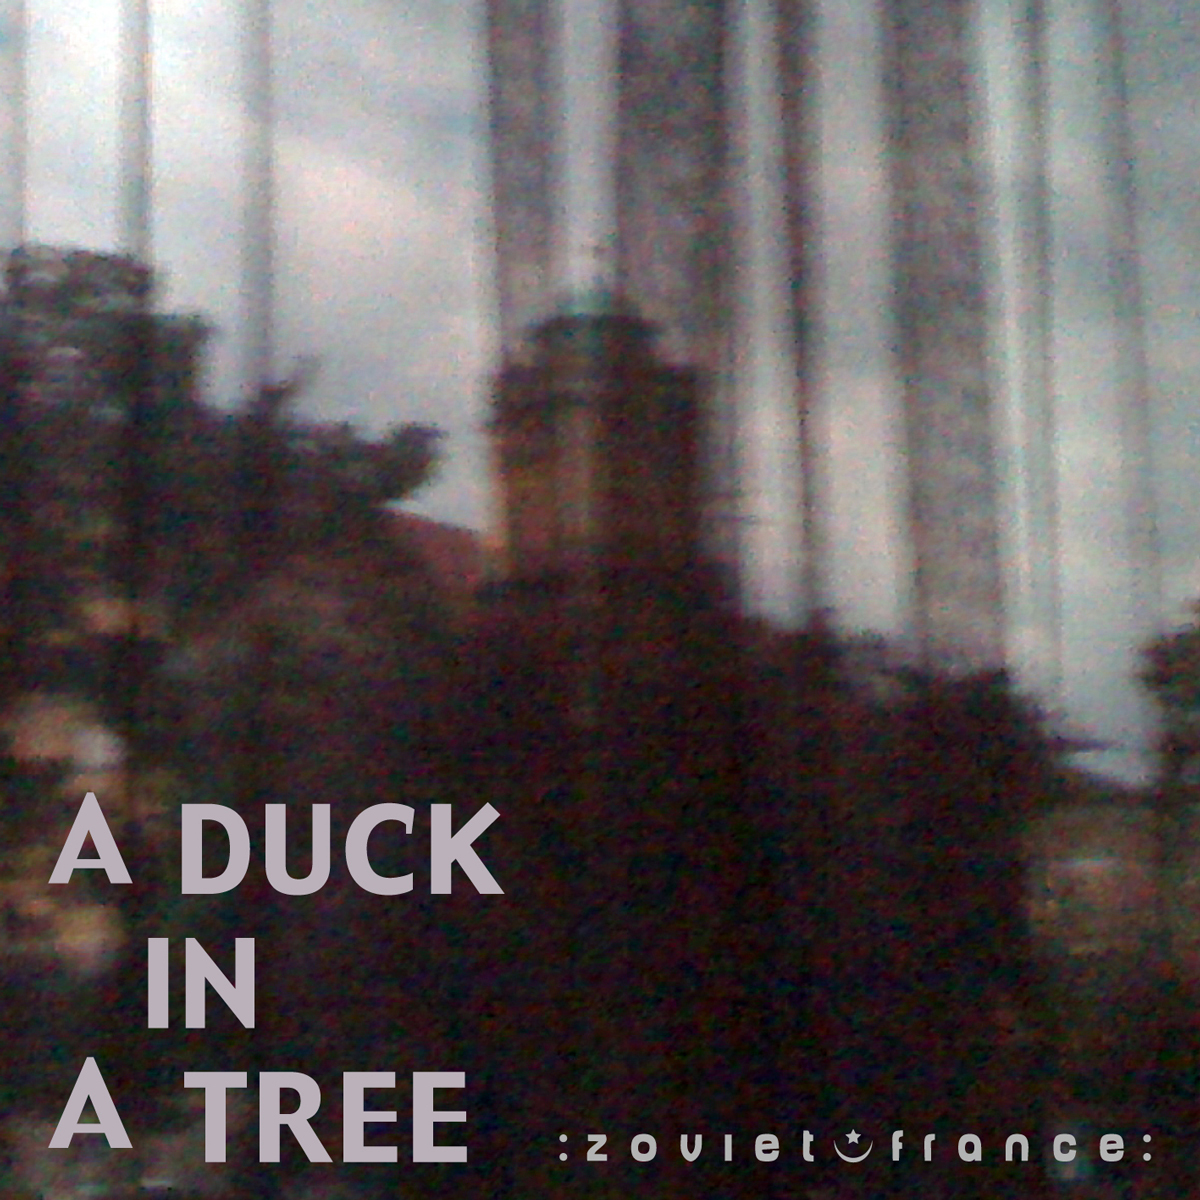 A-Duck-in-a-Tree-2012-09-15-_-Be-Guided-You-Will-Keep-an-Immortal-Recollection-layout-1200.jpg